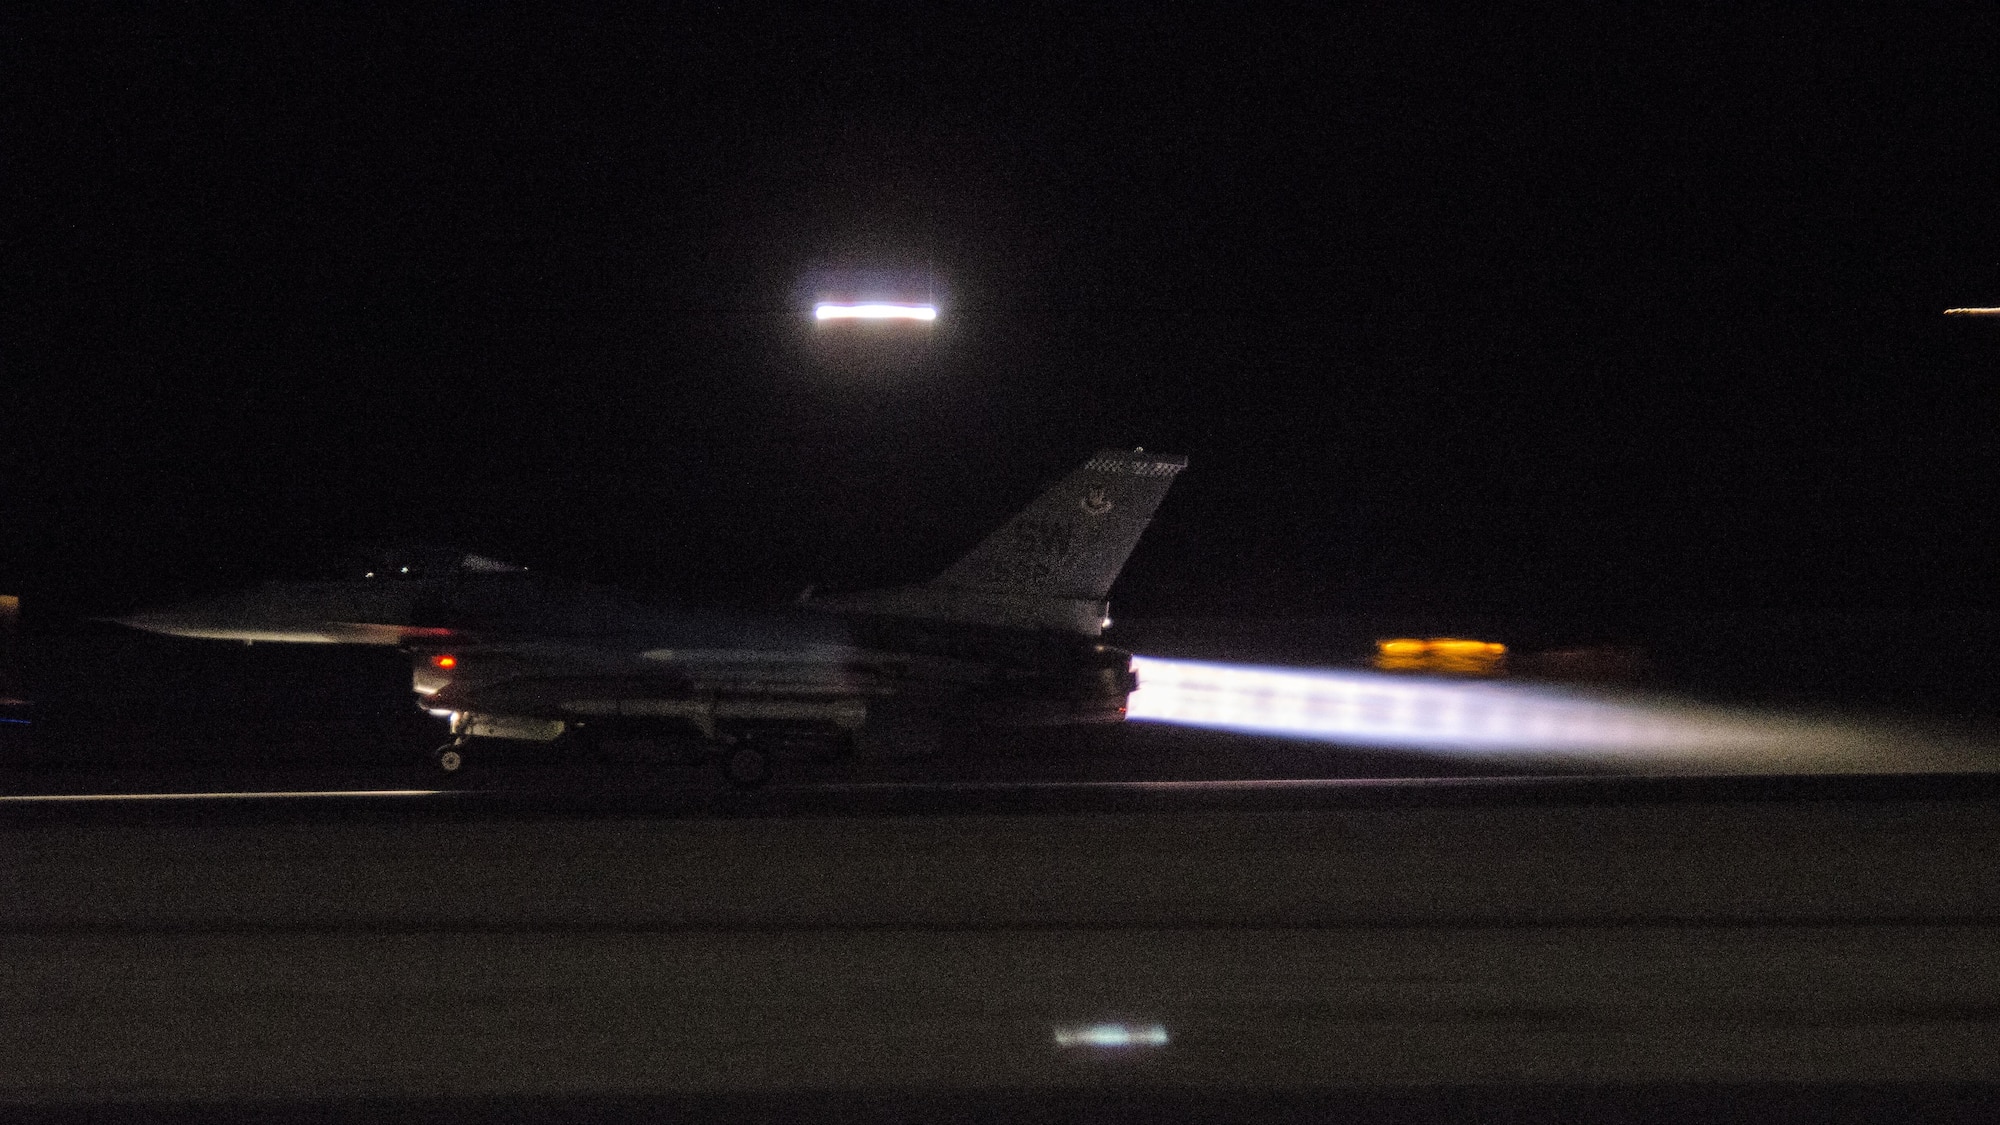 An F-16CM Fighting Falcon assigned to the 55th Fighter Squadron, Shaw Air Force Base, S.C., takes take off while conducting a night sortie during exercise Red Flag 16-4 at Nellis AFB, Nev., Aug. 17, 2016. The 55th FS flew two missions daily, a night and day sortie, in support of Red Flag 16-4 to provide suppression of enemy air defenses. (U. S. Air Force photo by Tech. Sgt. Frank Miller)